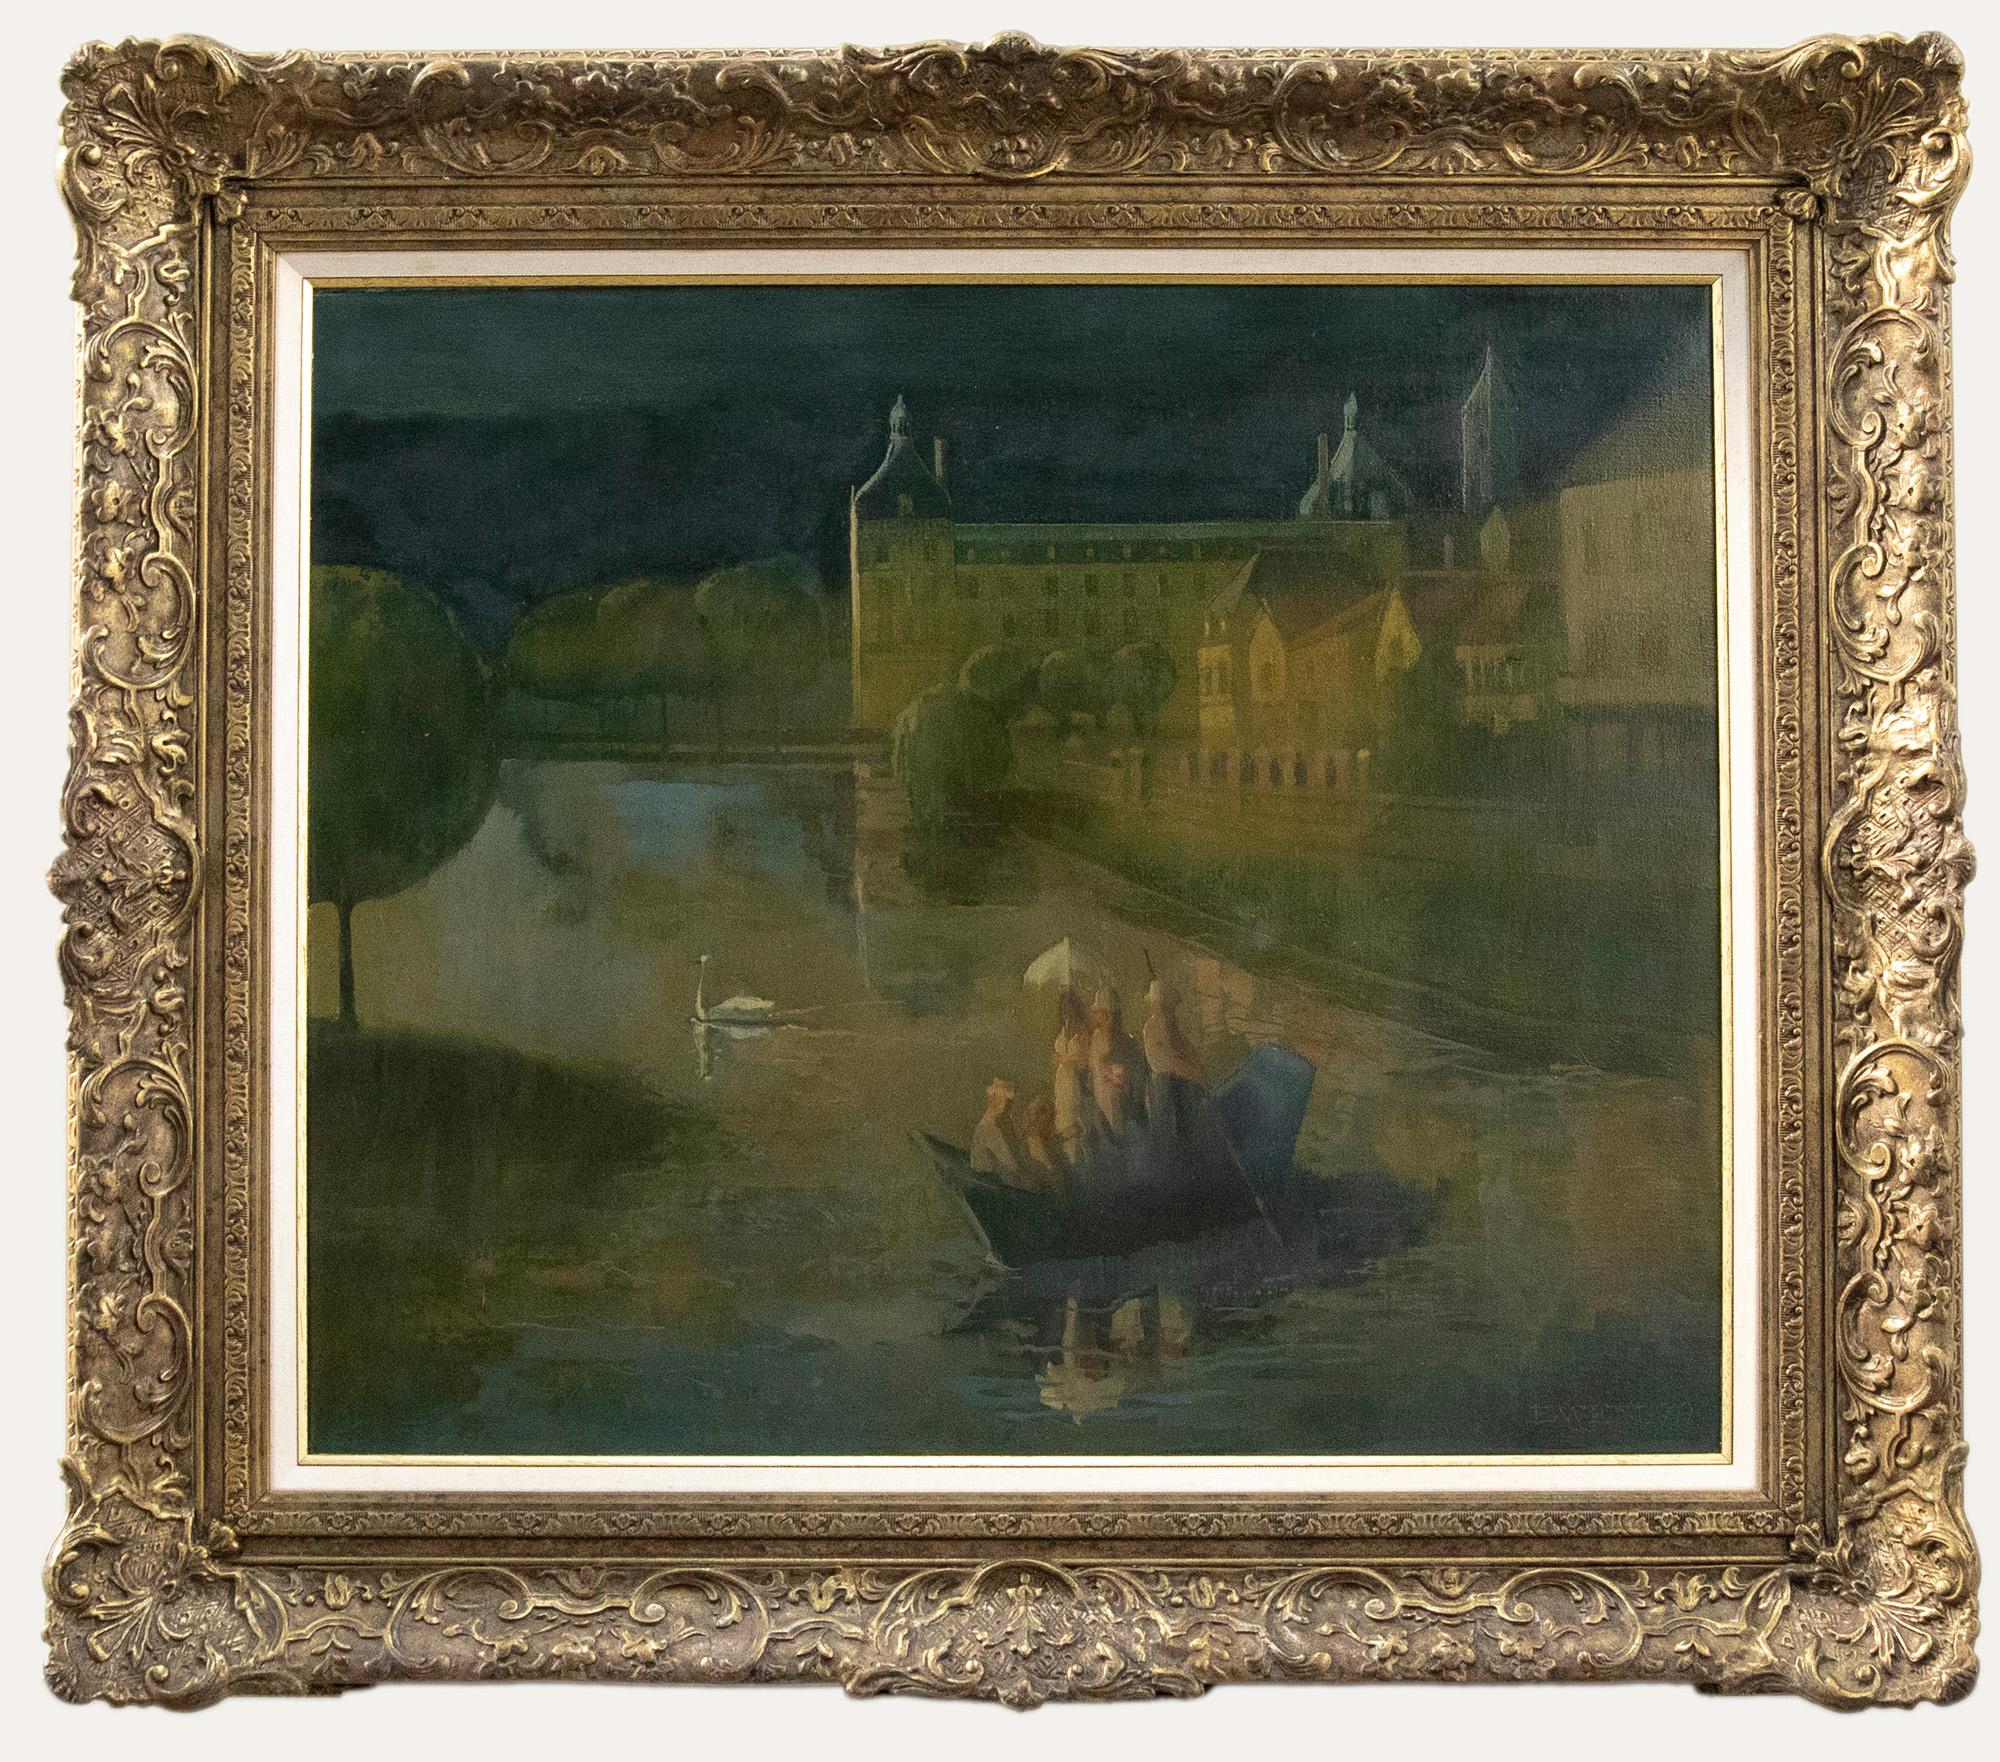 Unknown Landscape Painting - E. Wen - Framed Contemporary Oil, Boating at Twilight